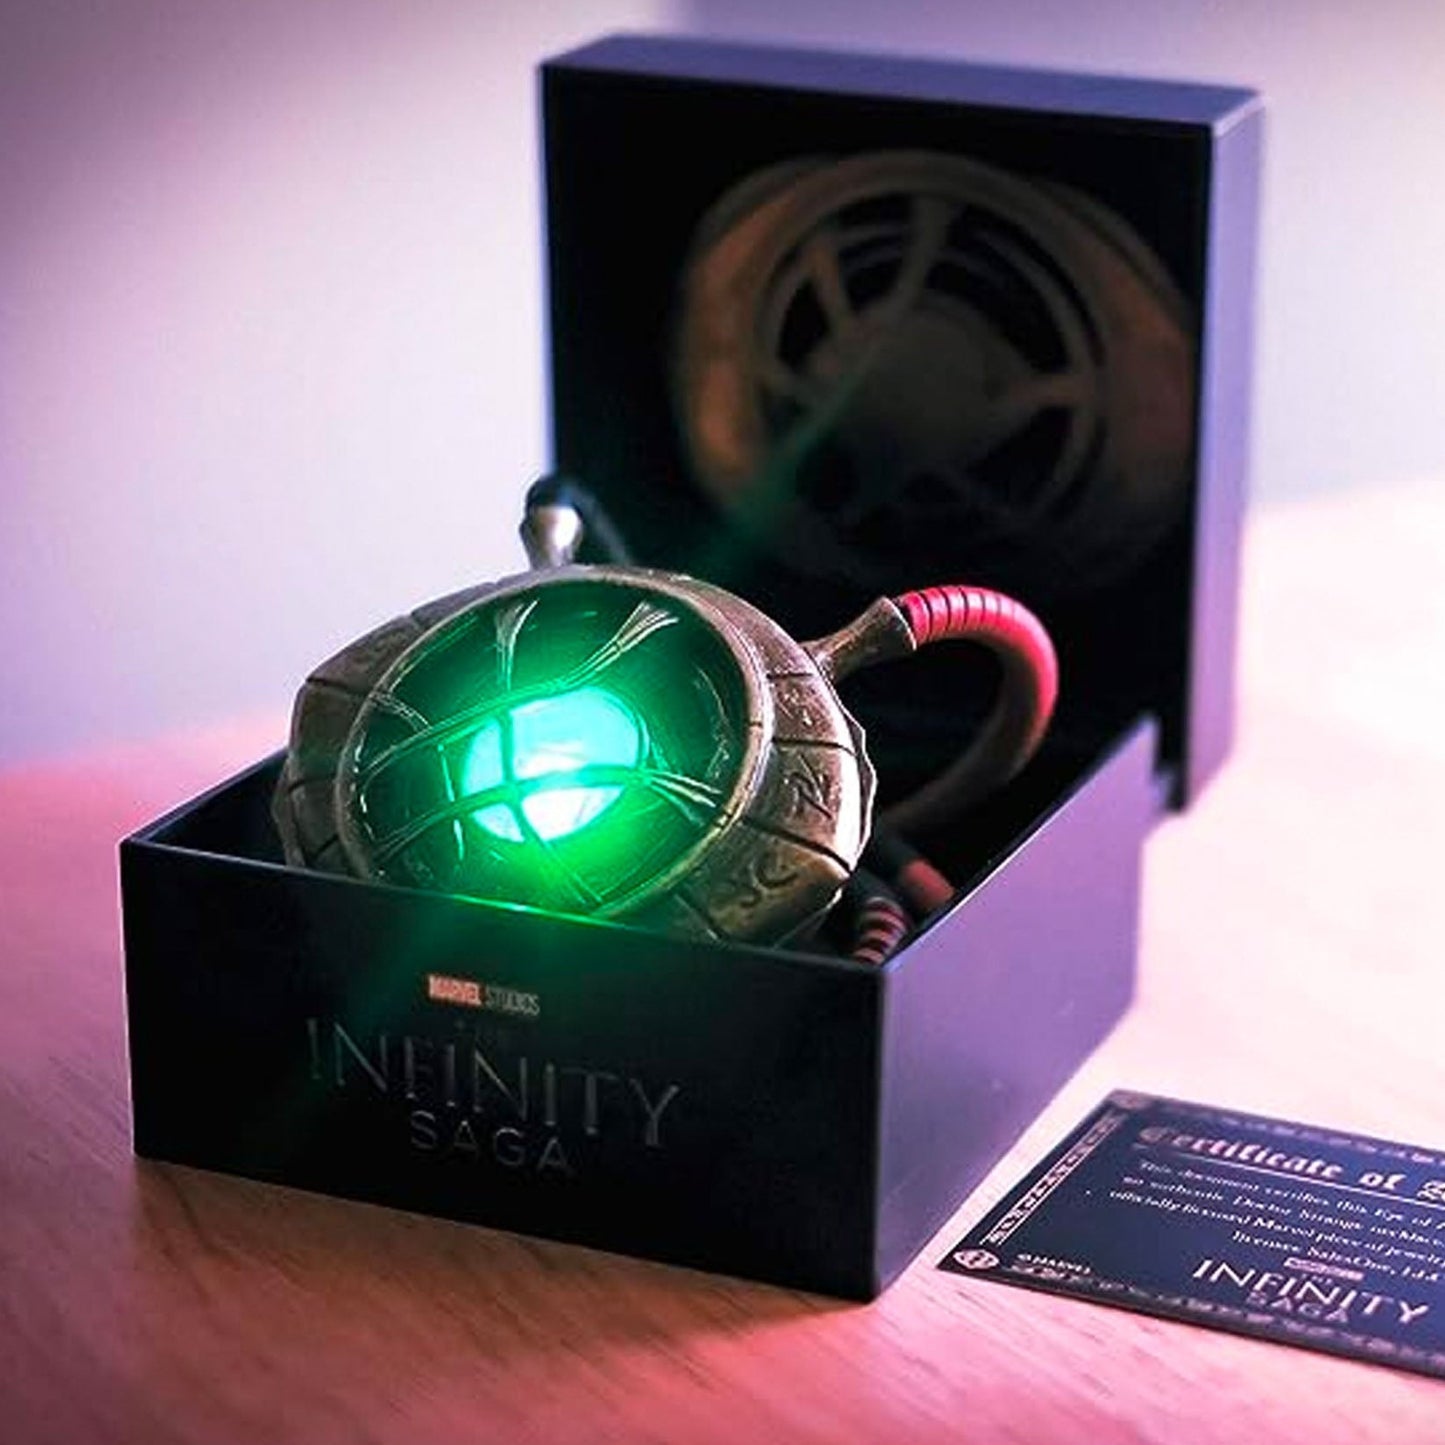 Eye of Agamotto (Doctor Strange) Marvel Collector's Edition Light-Up Prop Replica Amulet